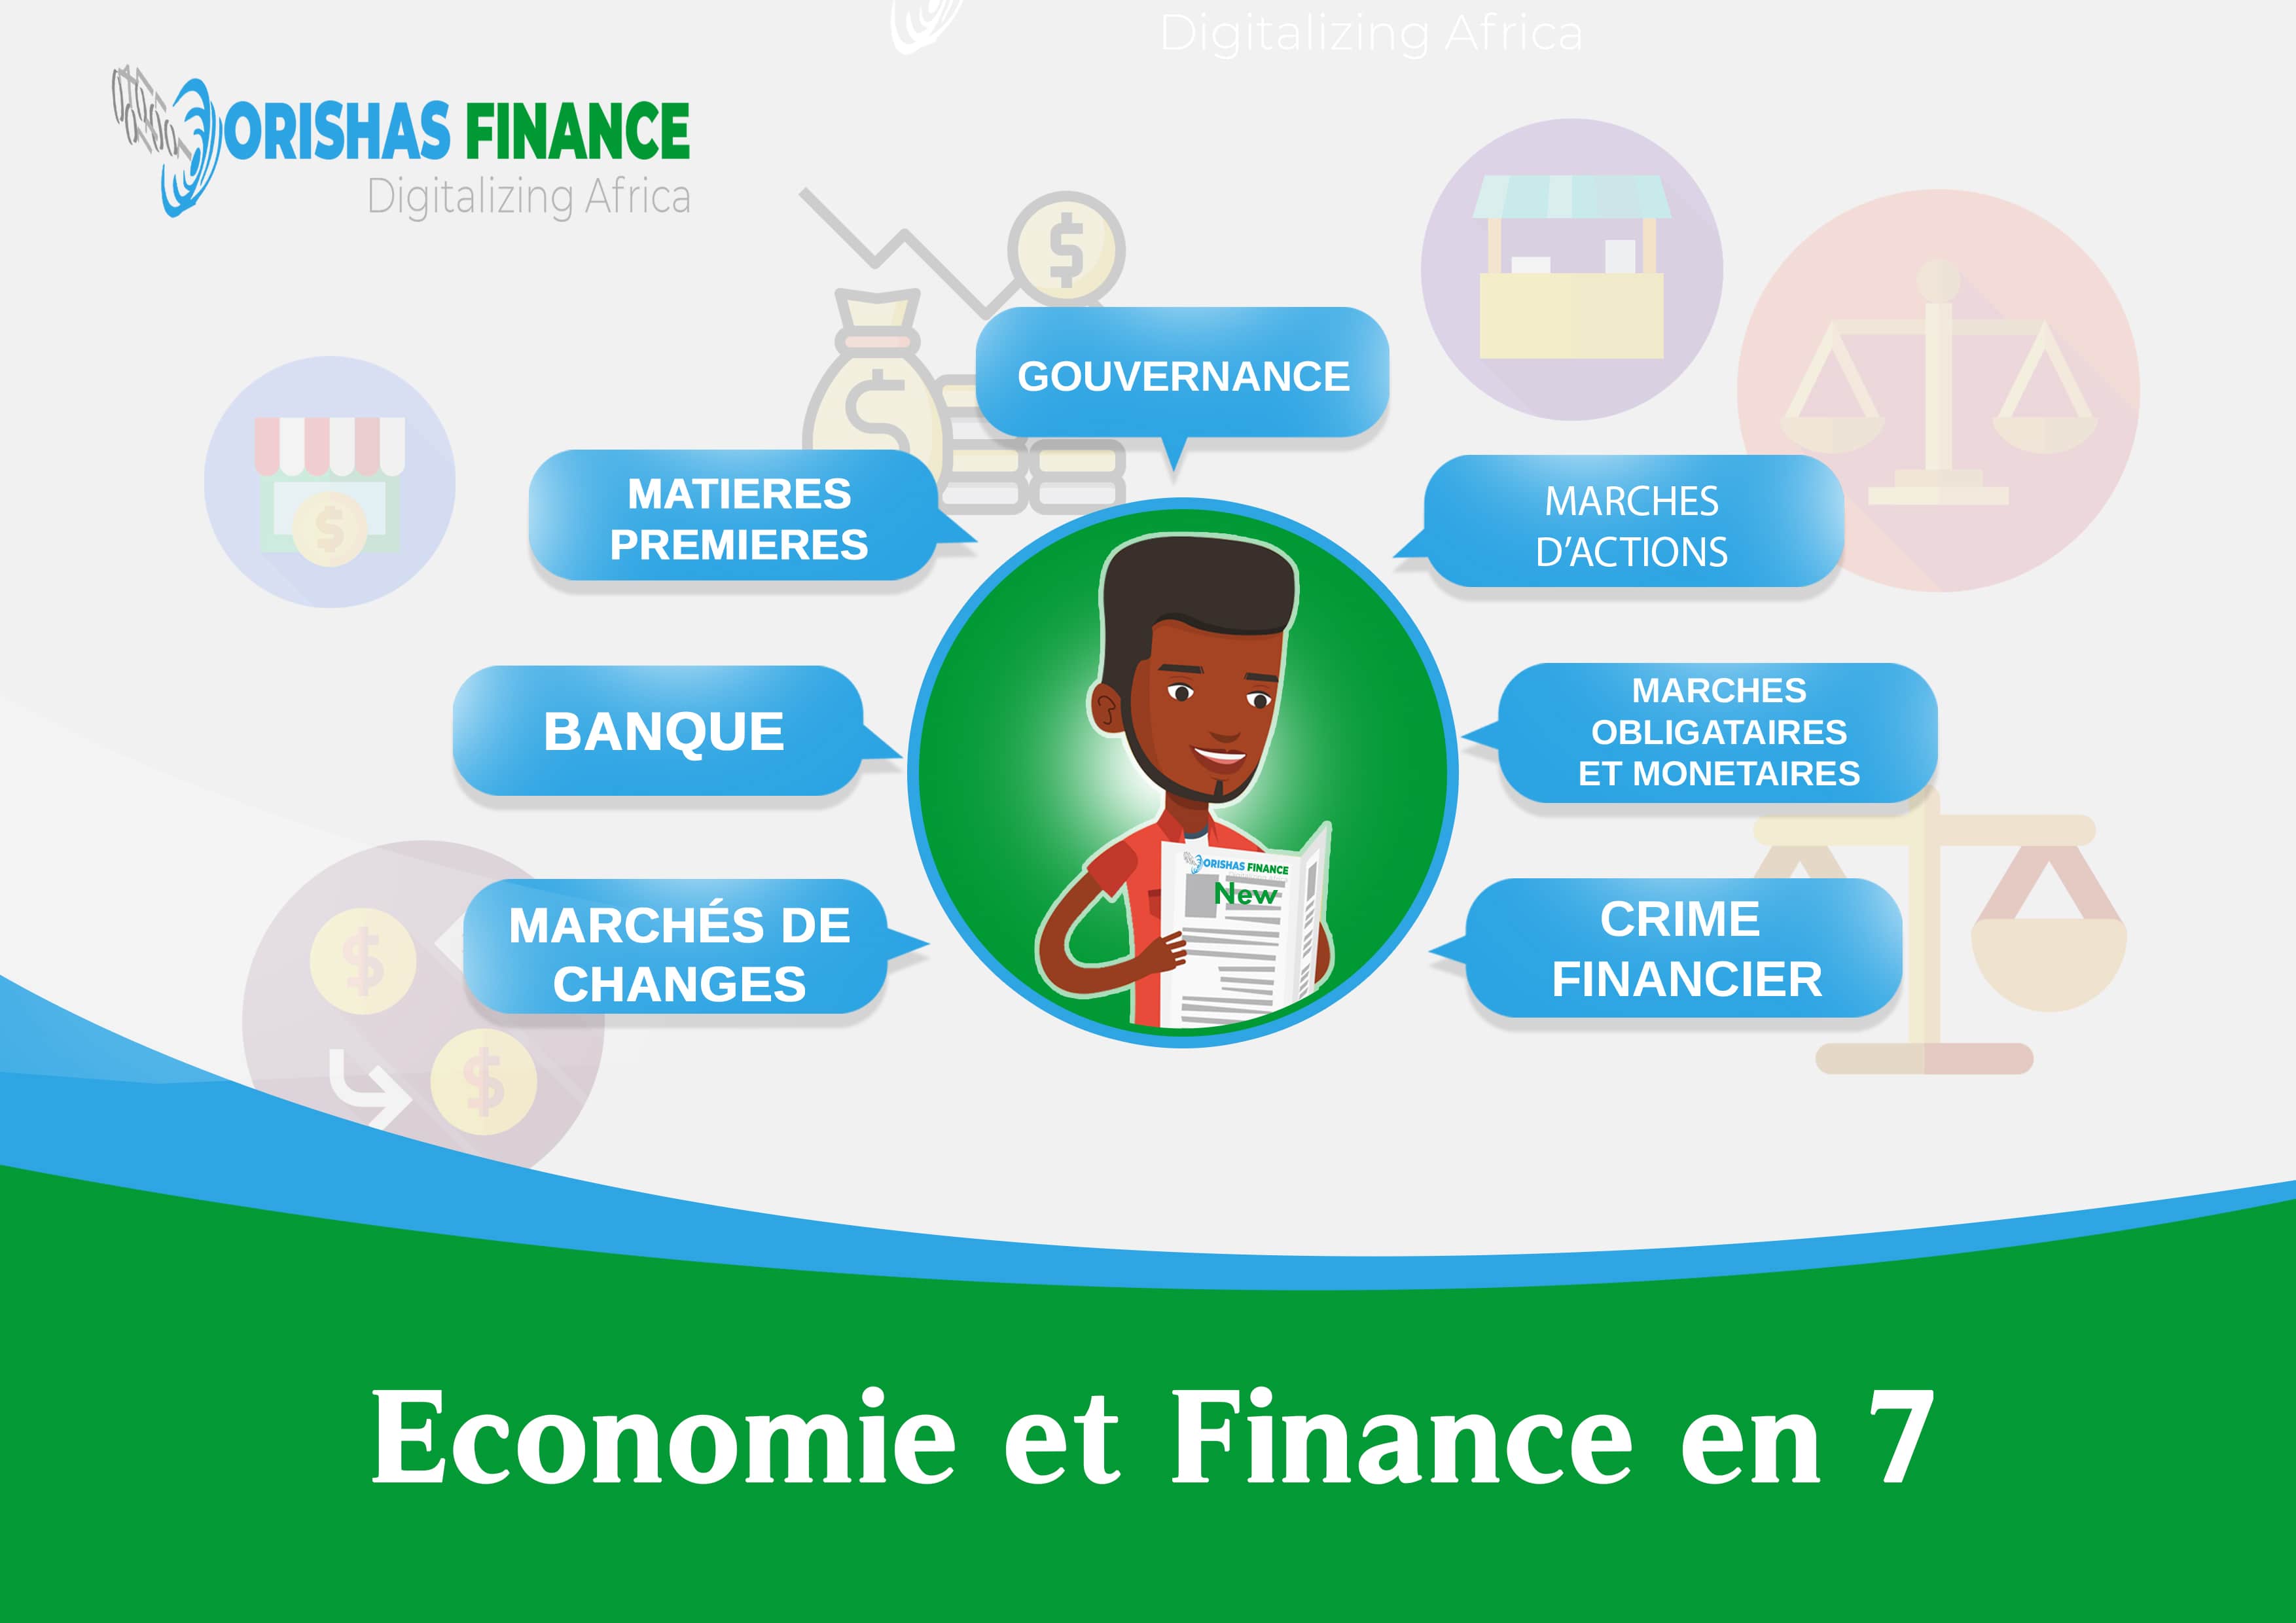  Economy and finance in 7 from March 15 to 19, 2021 